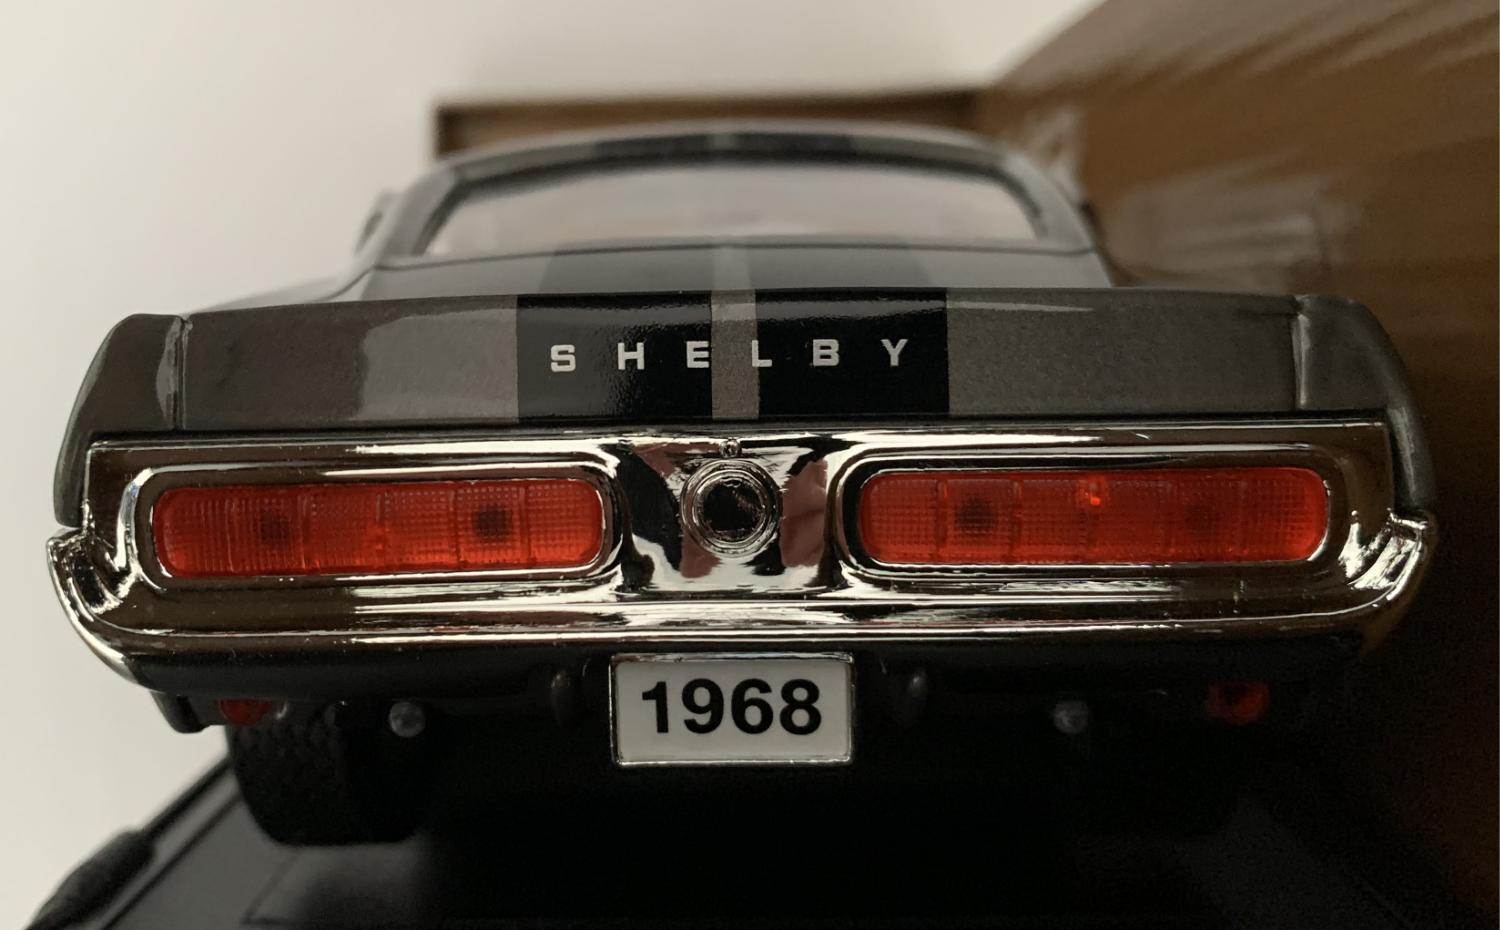 Shelby GT-500KR 1968 in silver (Eleanor) 1:18 scale model from Road Signature Collection